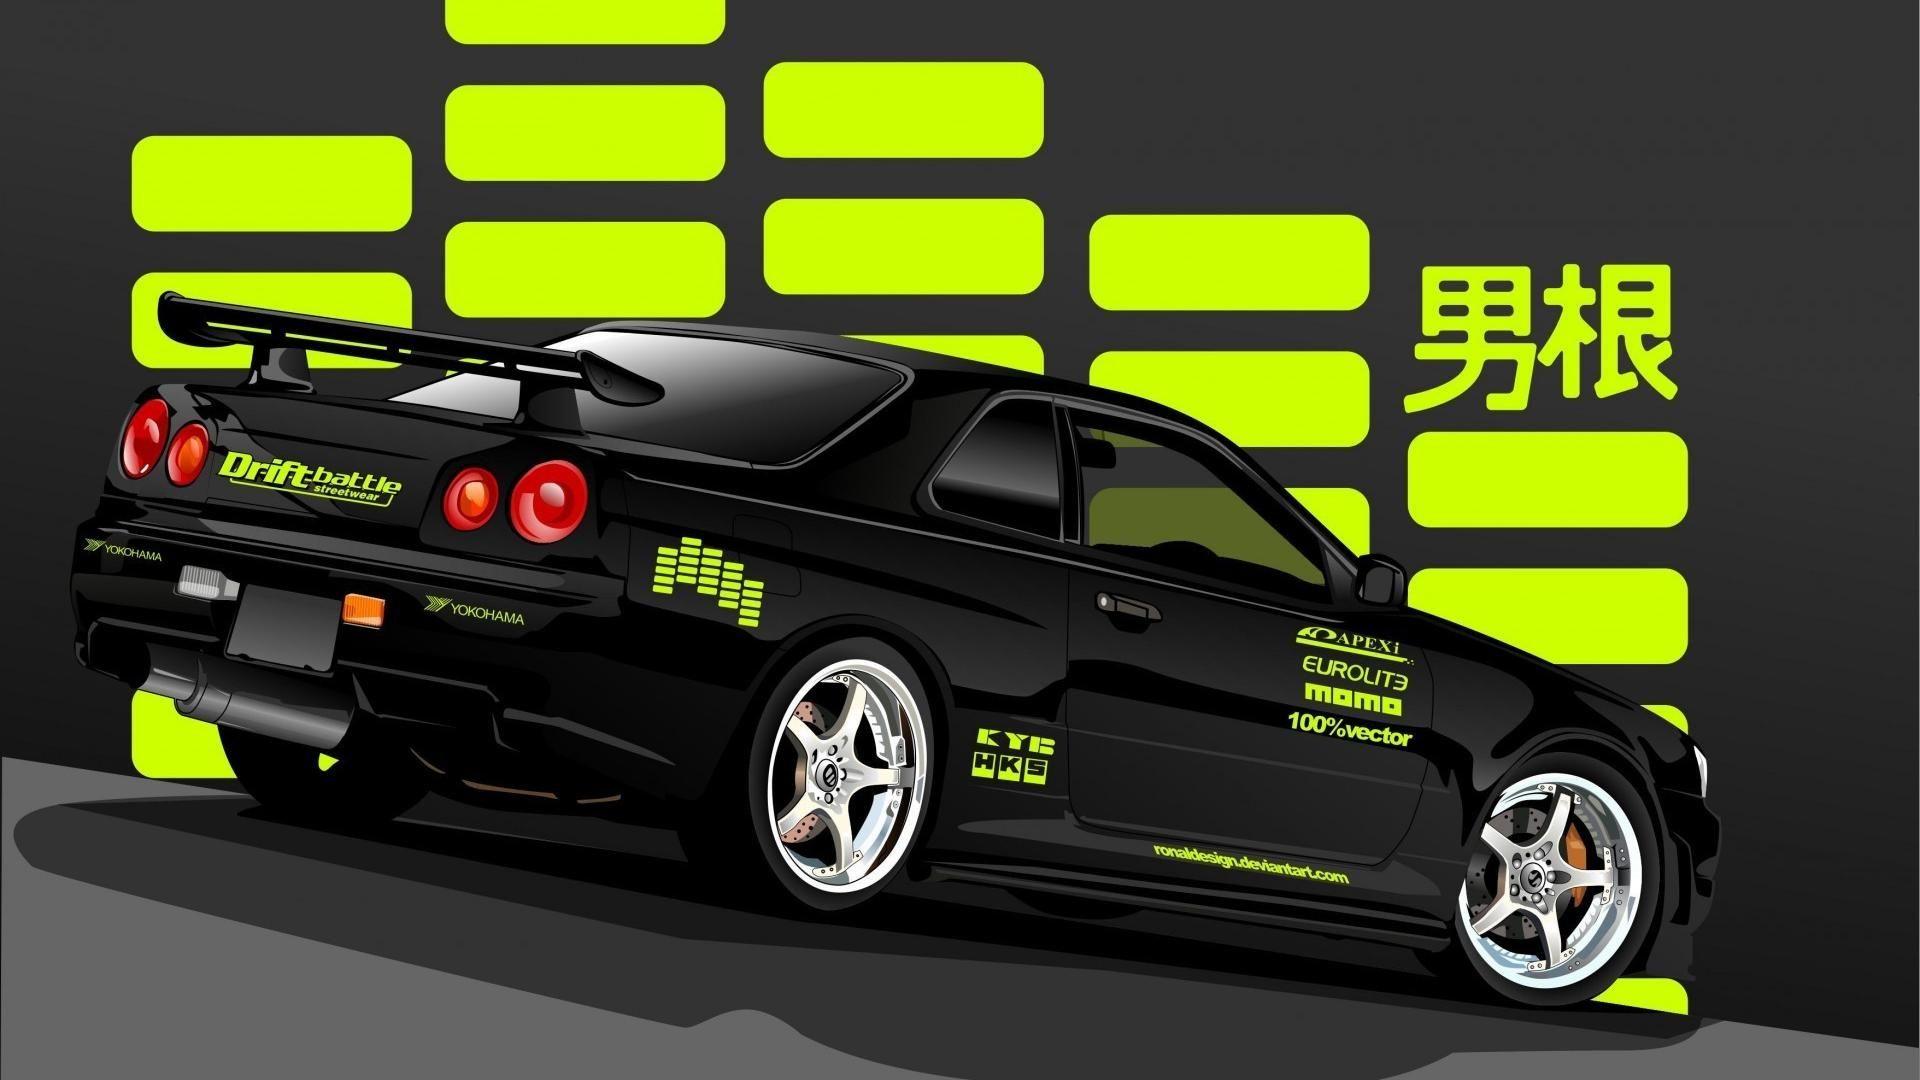 Jdm Wallpaper 4K For Laptop - 65 Jdm Wallpapers Hd / Looking for the ...